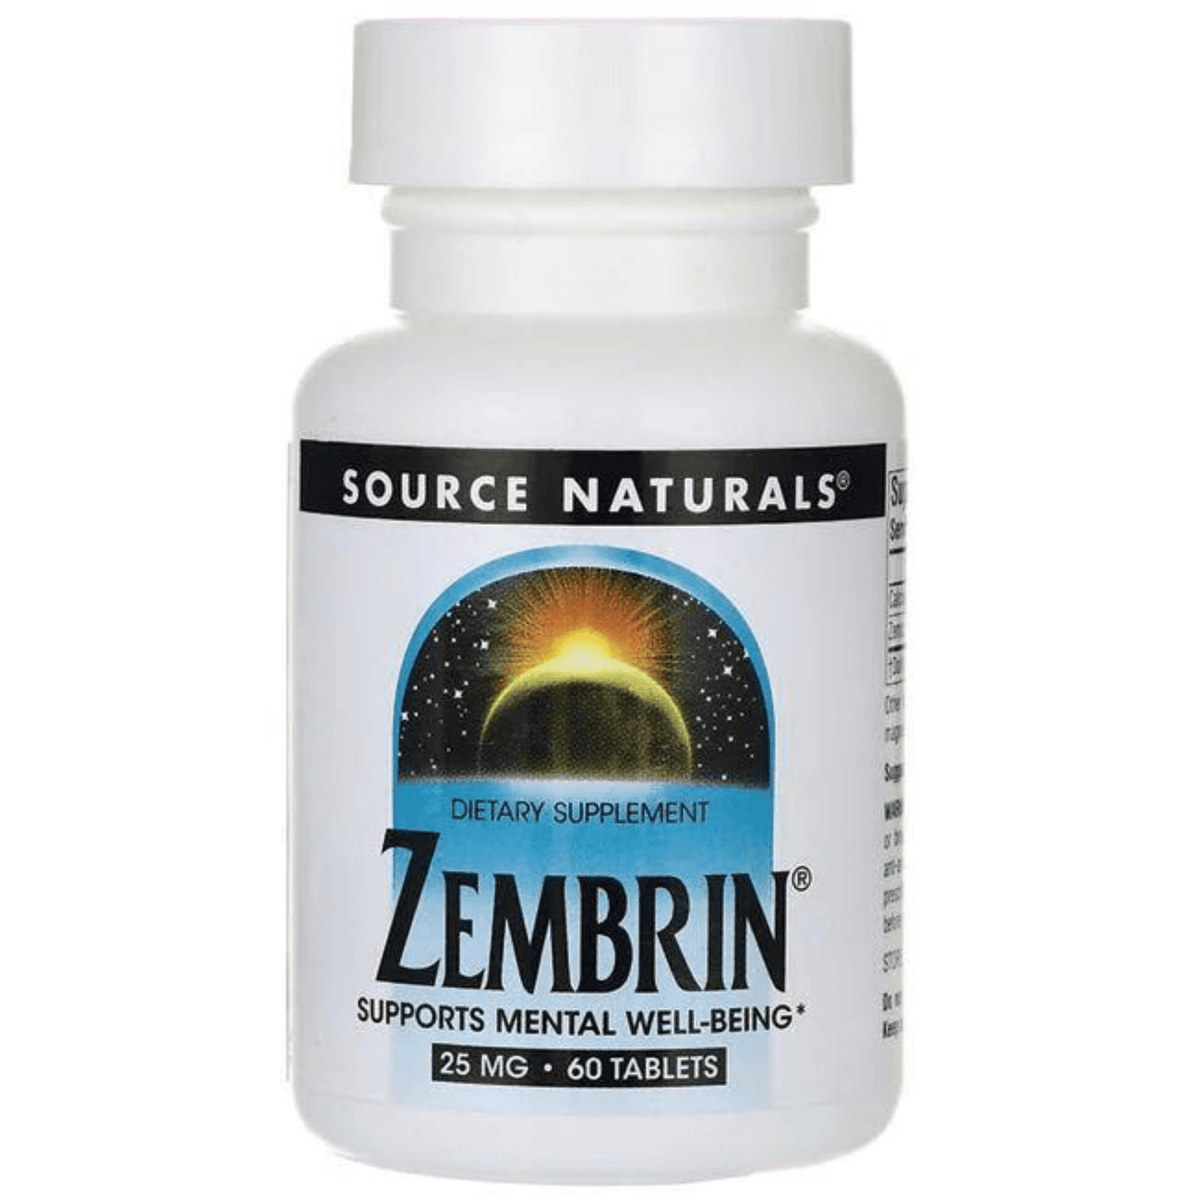 Primary Image of Zembrin 25mg Tablets